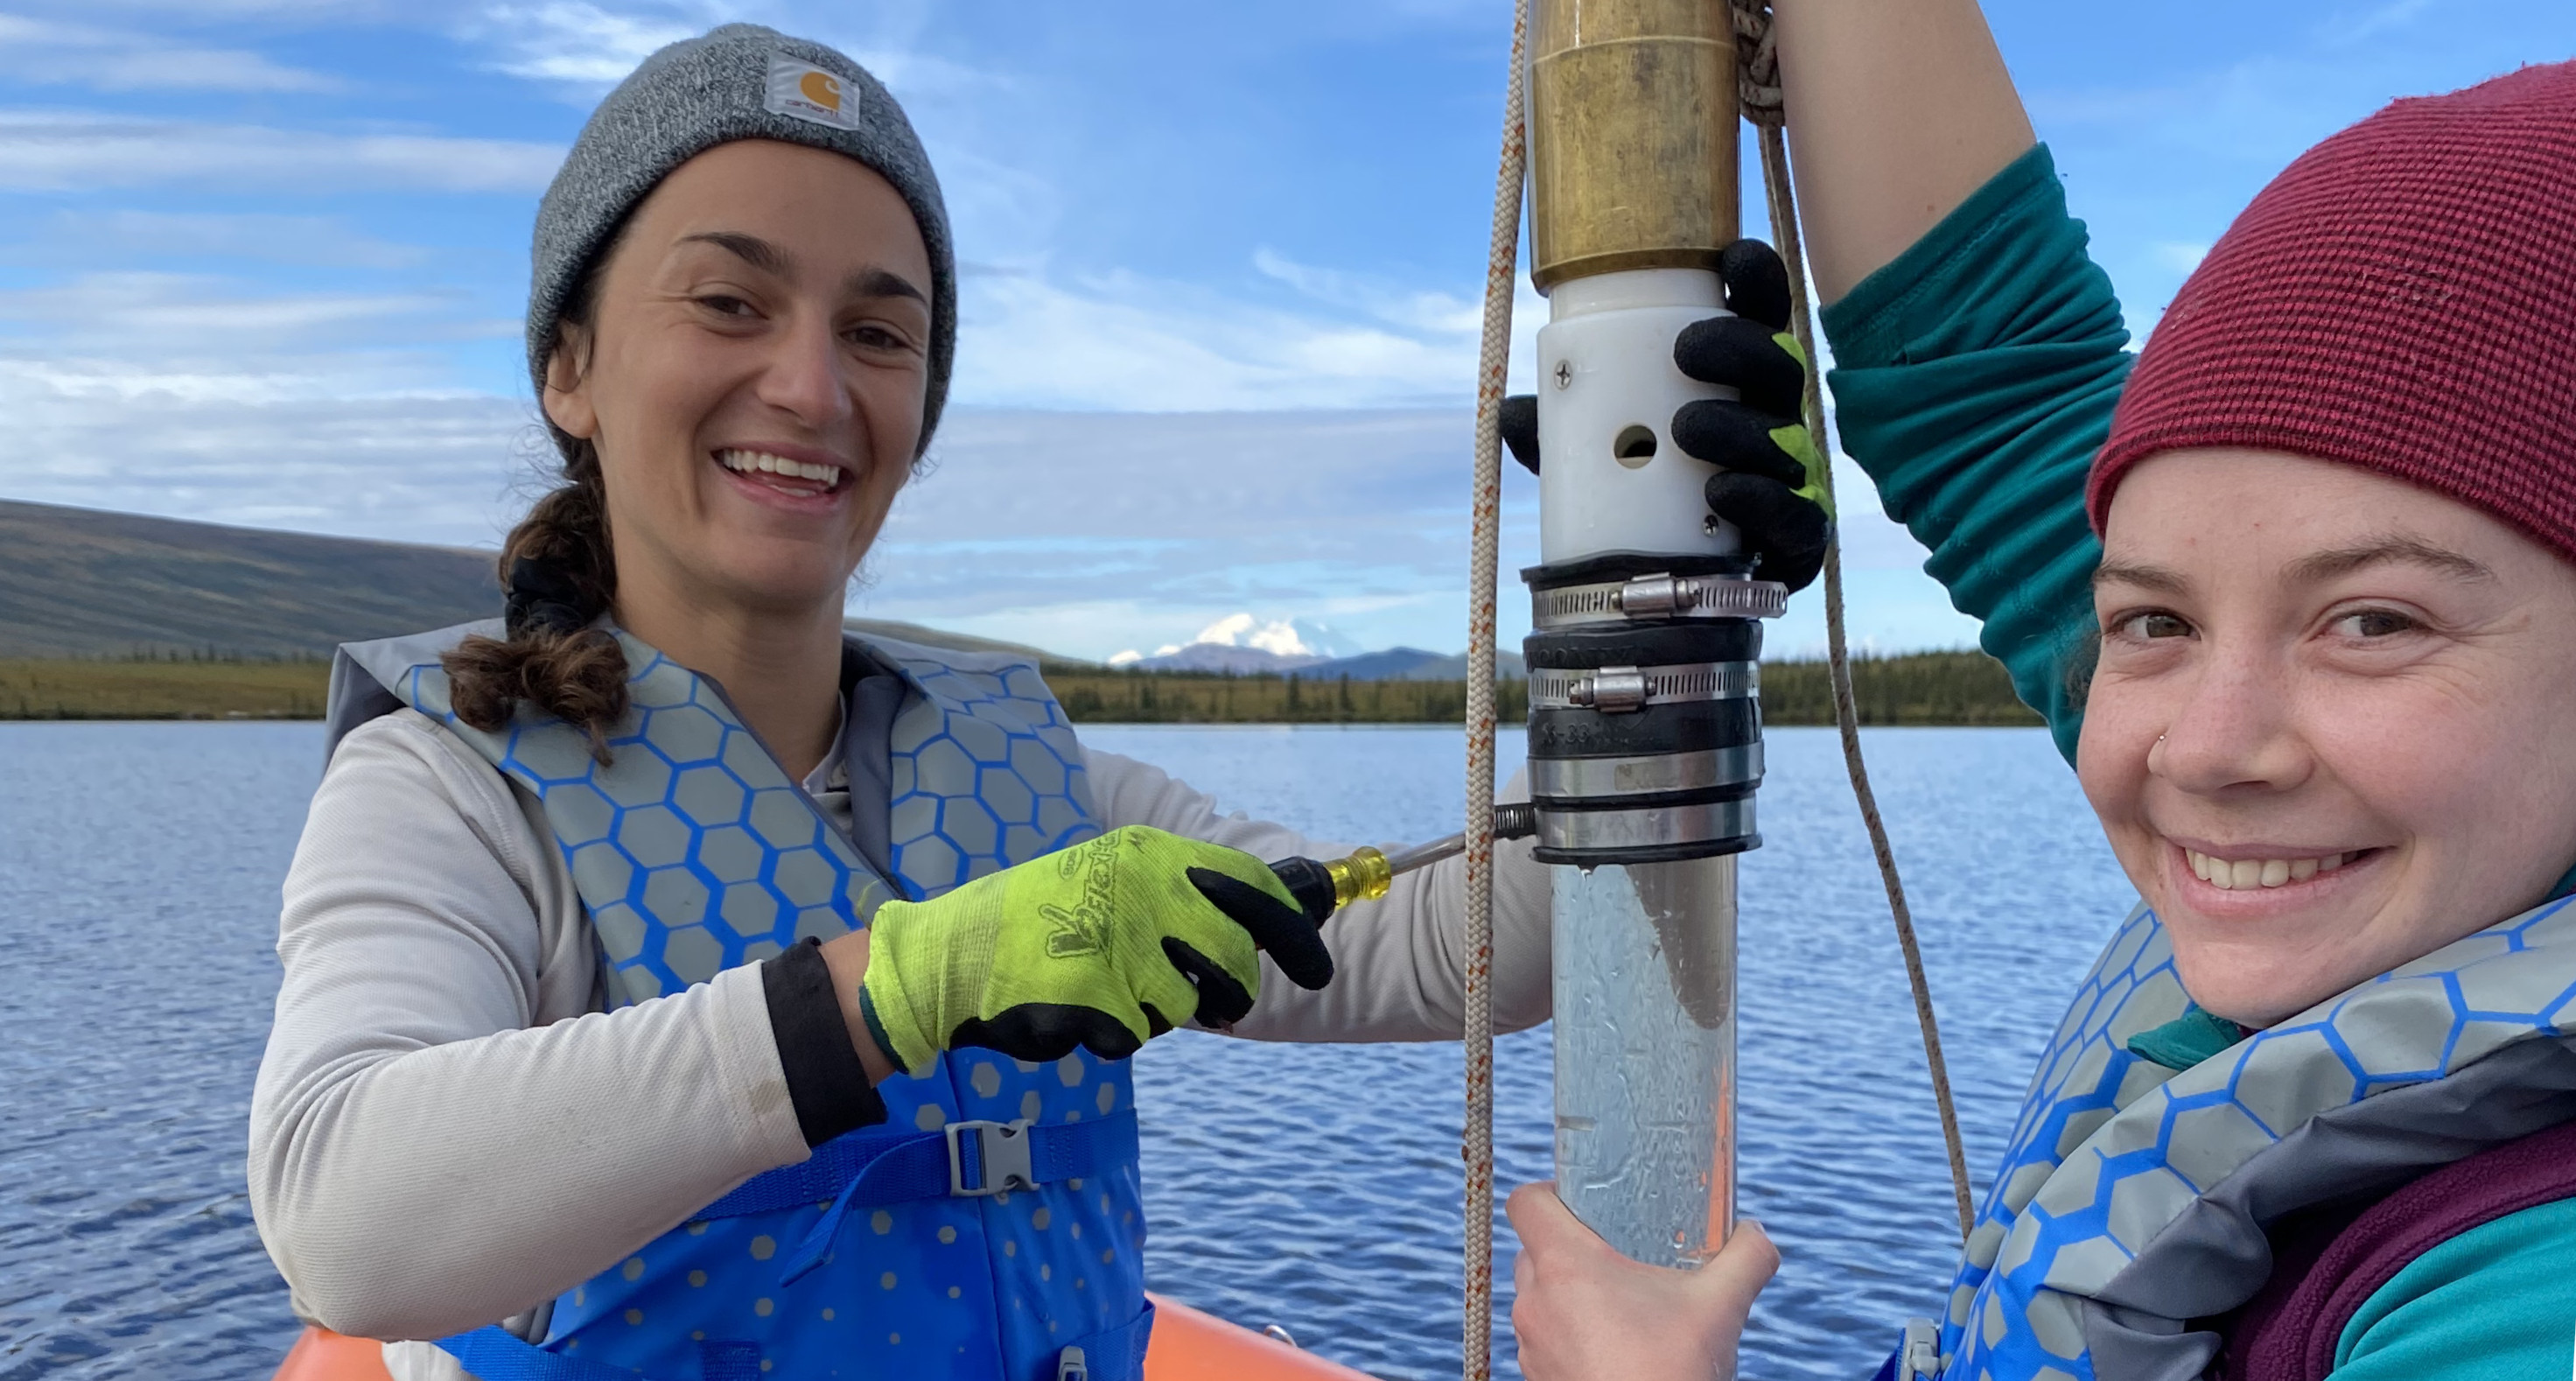 Ellie Broadman (on the left) collecting lake sediment cores in Alaska.